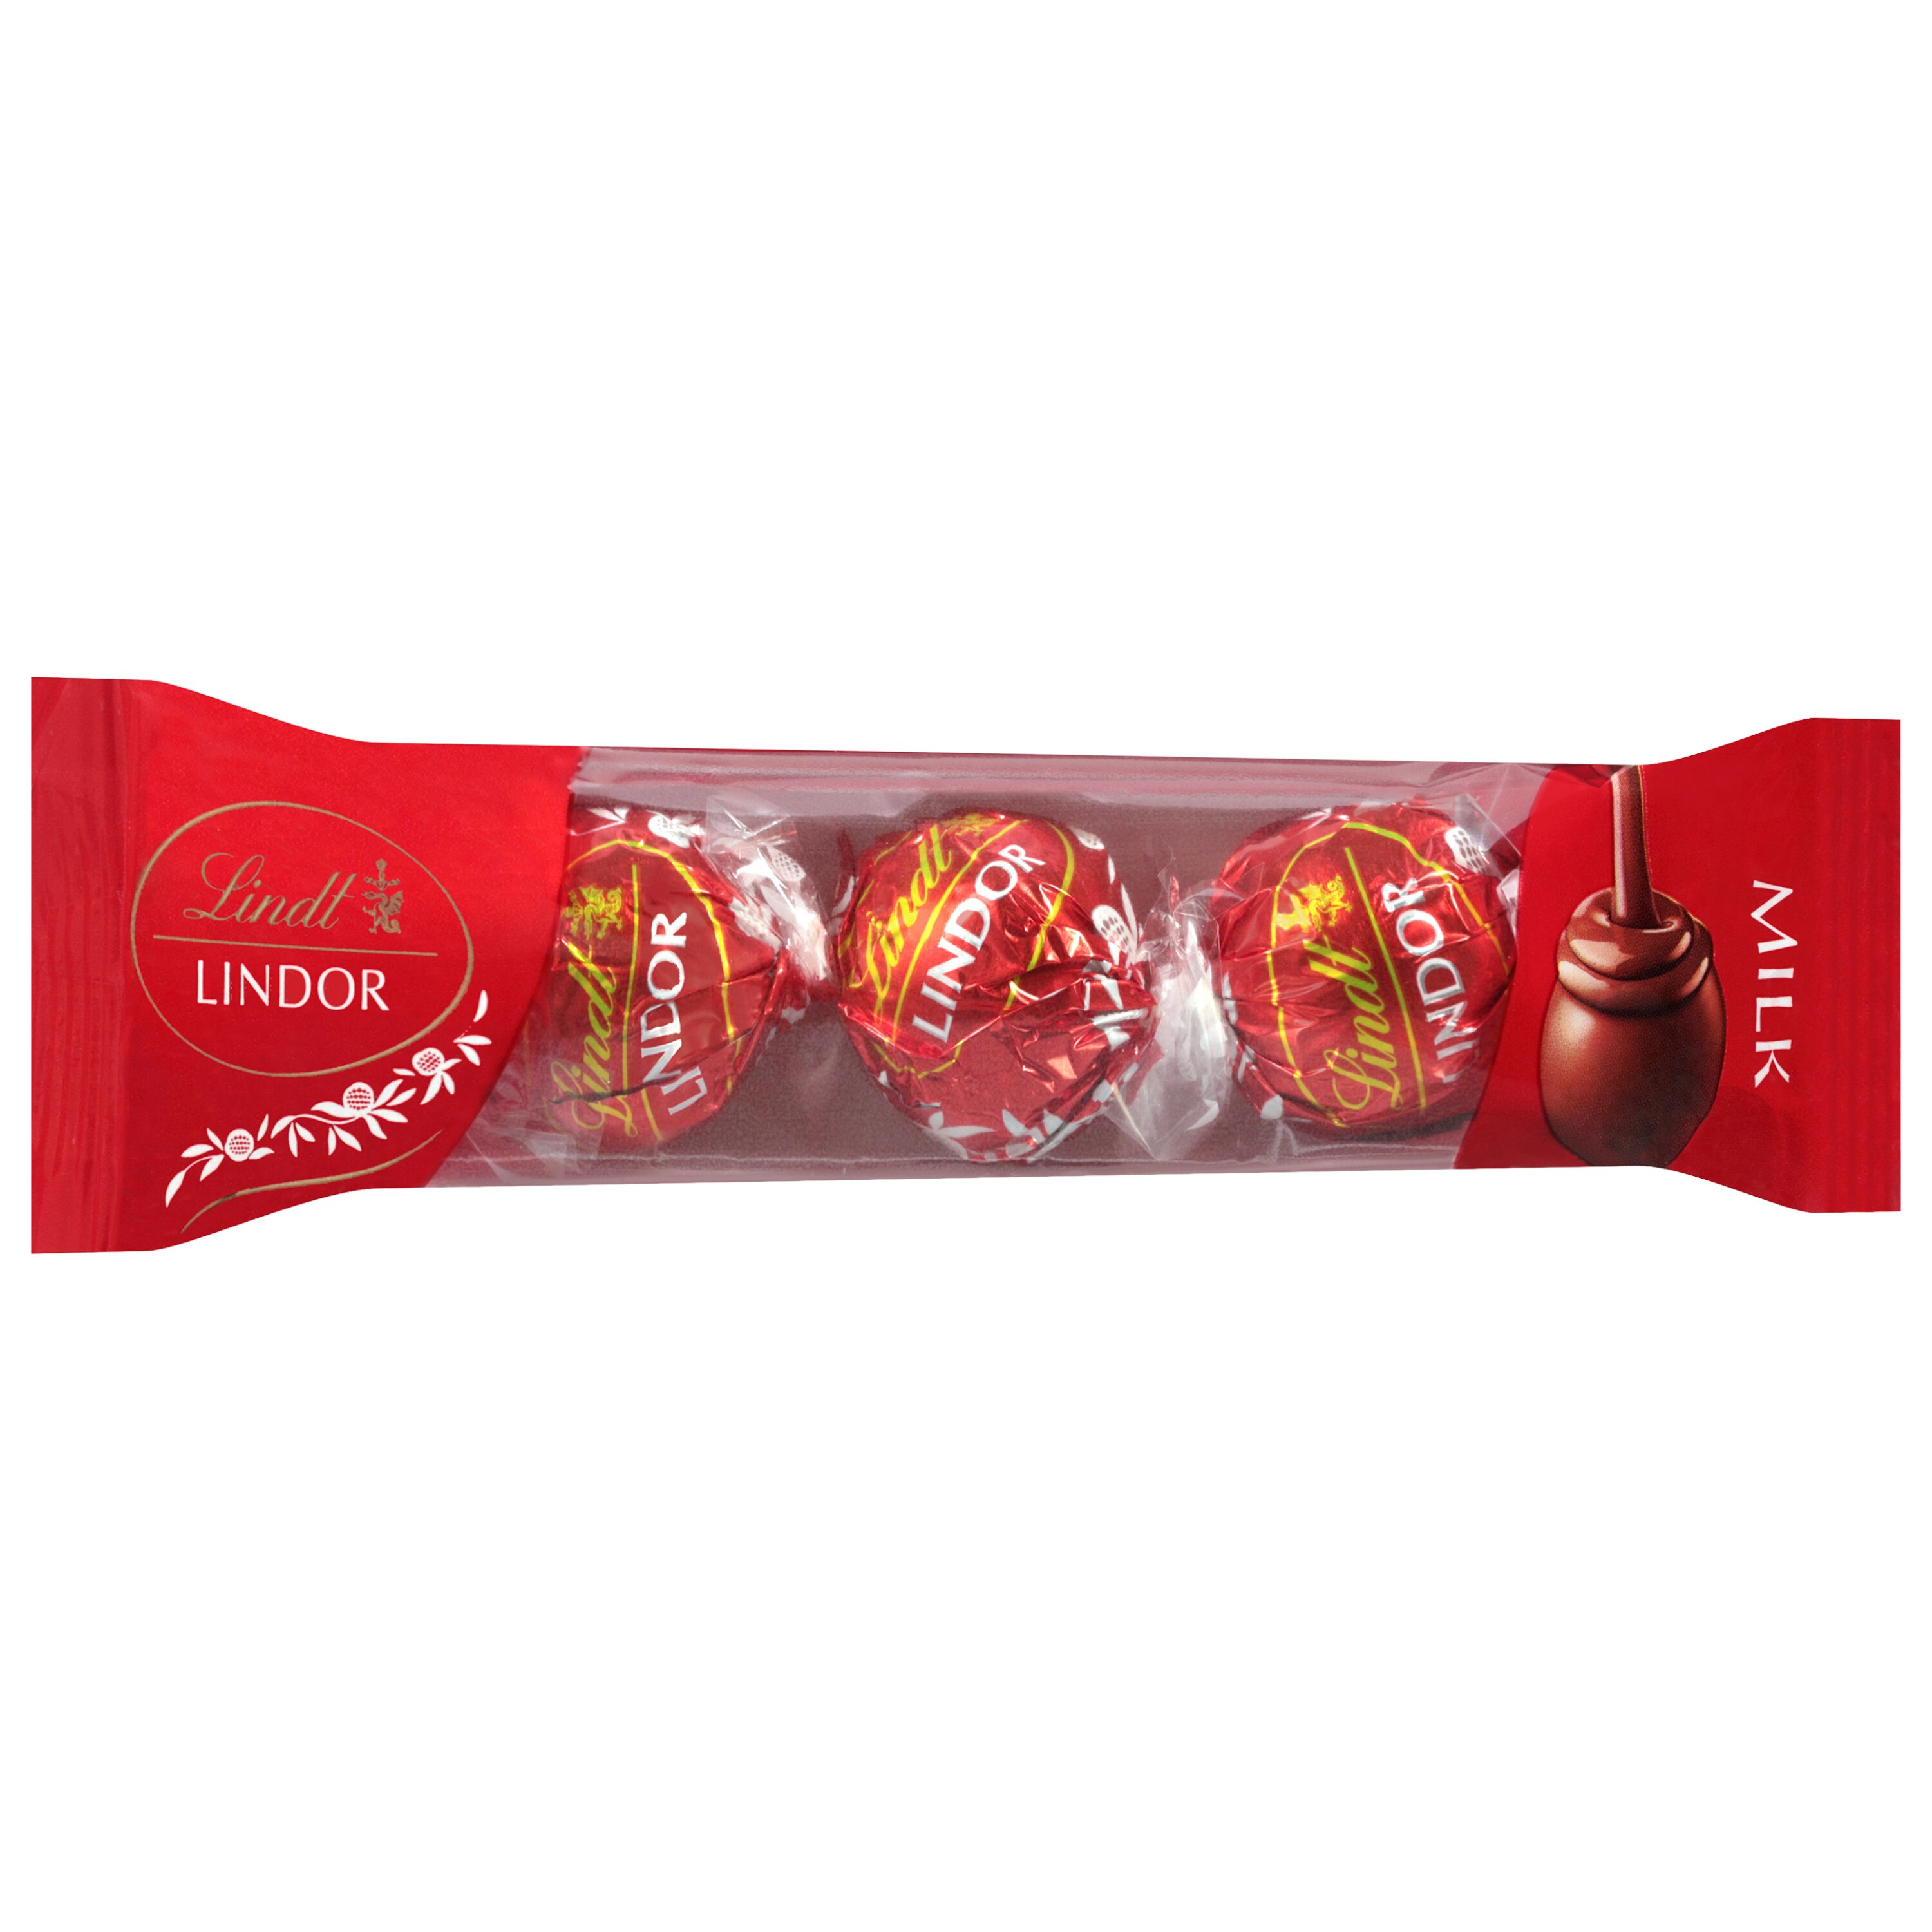 Lindt LINDOR Milk Chocolate Candy Truffles, Chocolates with Smooth, Melting Truffle Center, 1.3 oz., 3 Pack